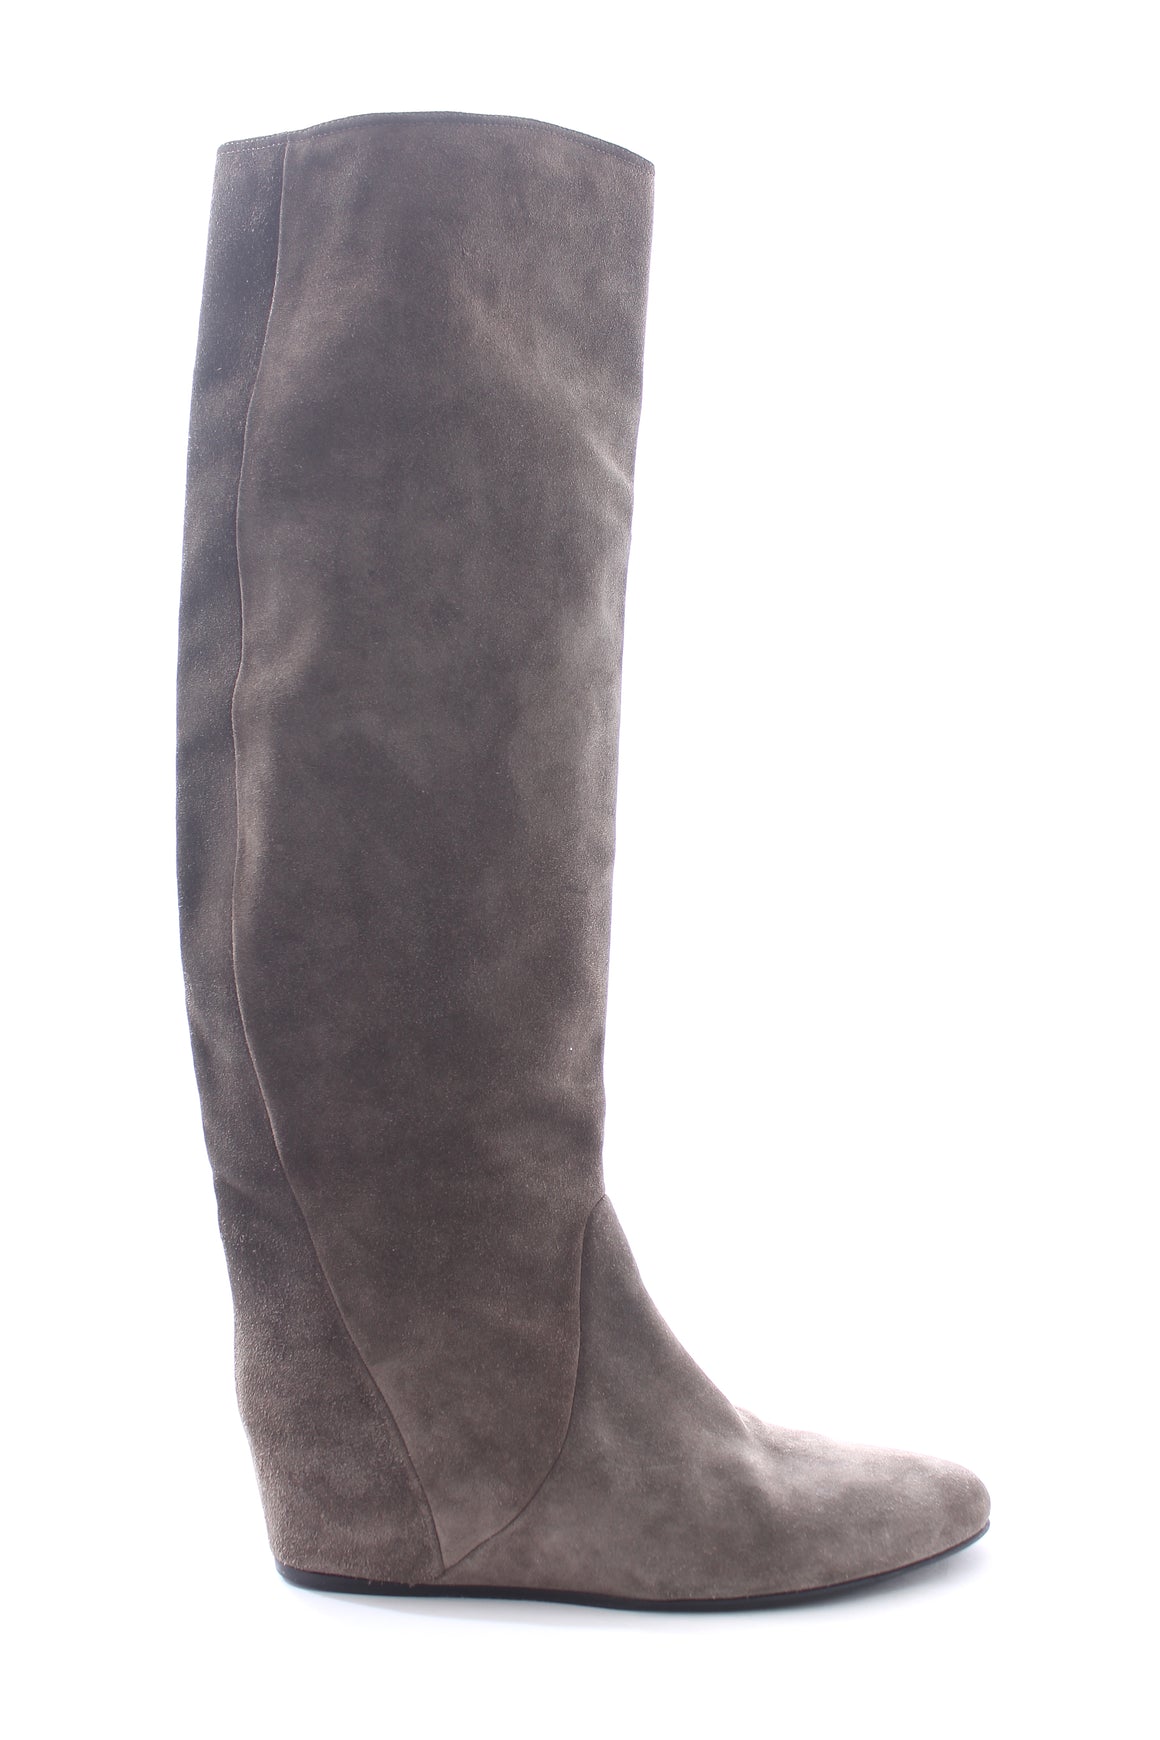 Lanvin Suede Long Wedge Boots